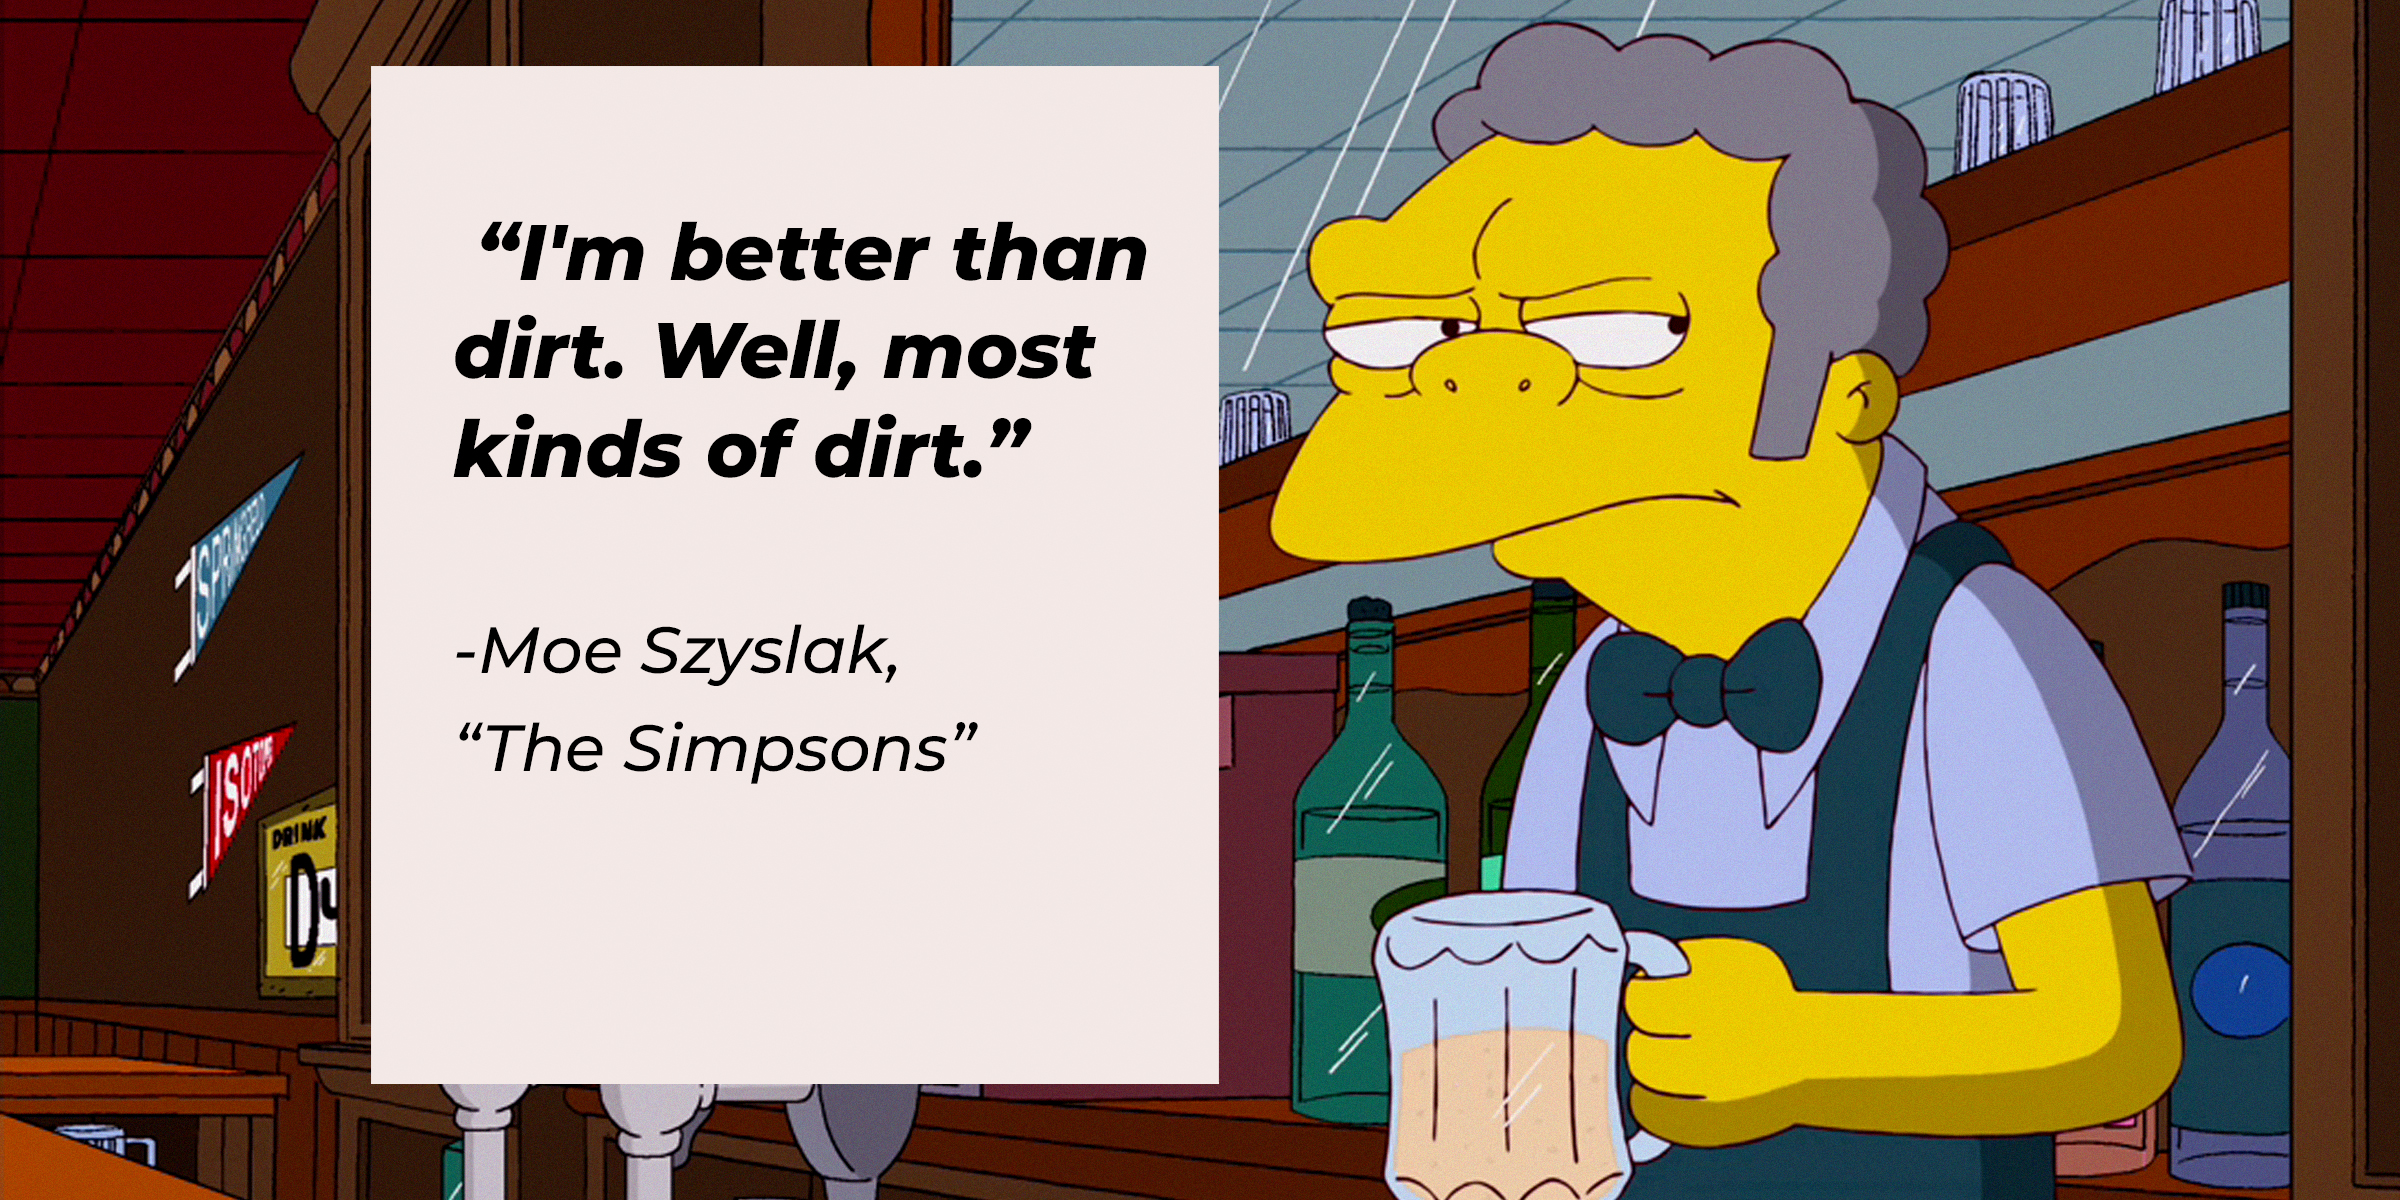 Image of Moe Szyslak with his quote from "The Simpsons:" “I'm better than dirt. Well, most kinds of dirt.” | Source: Facebook.com/TheSimpsons